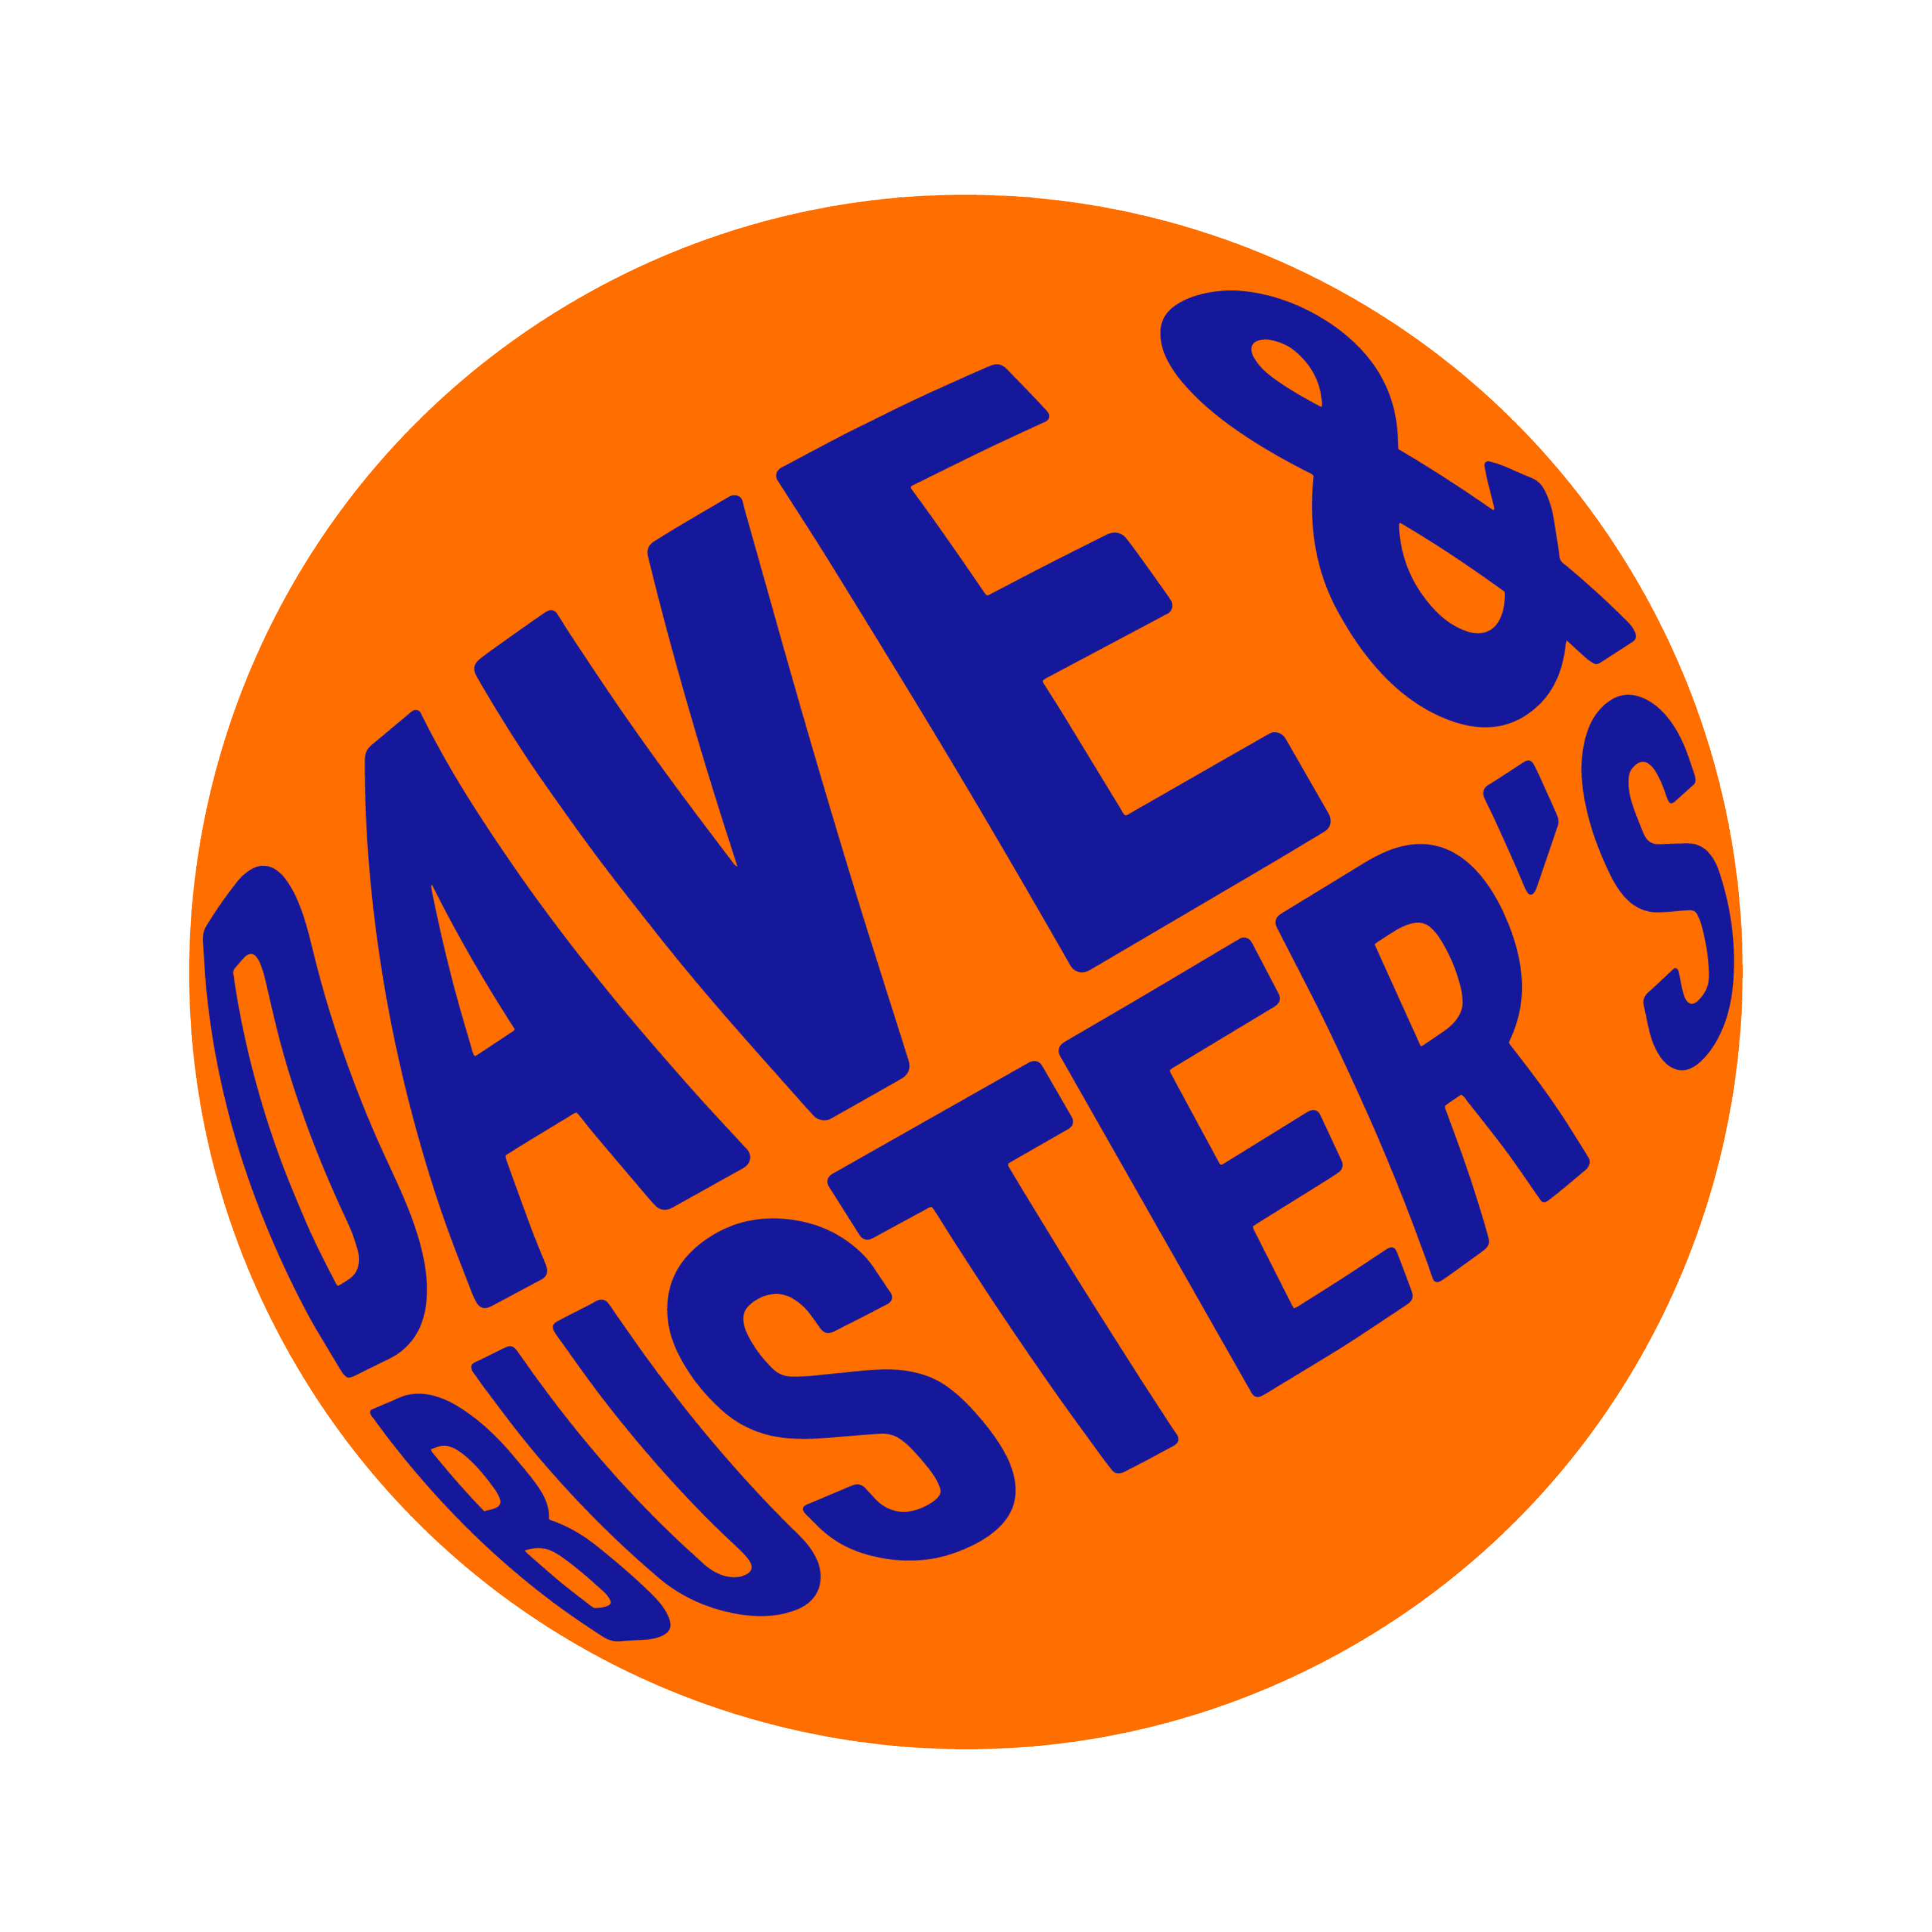 Dave & Busters: Free $20 When You Spend $20 - Kollel Budget